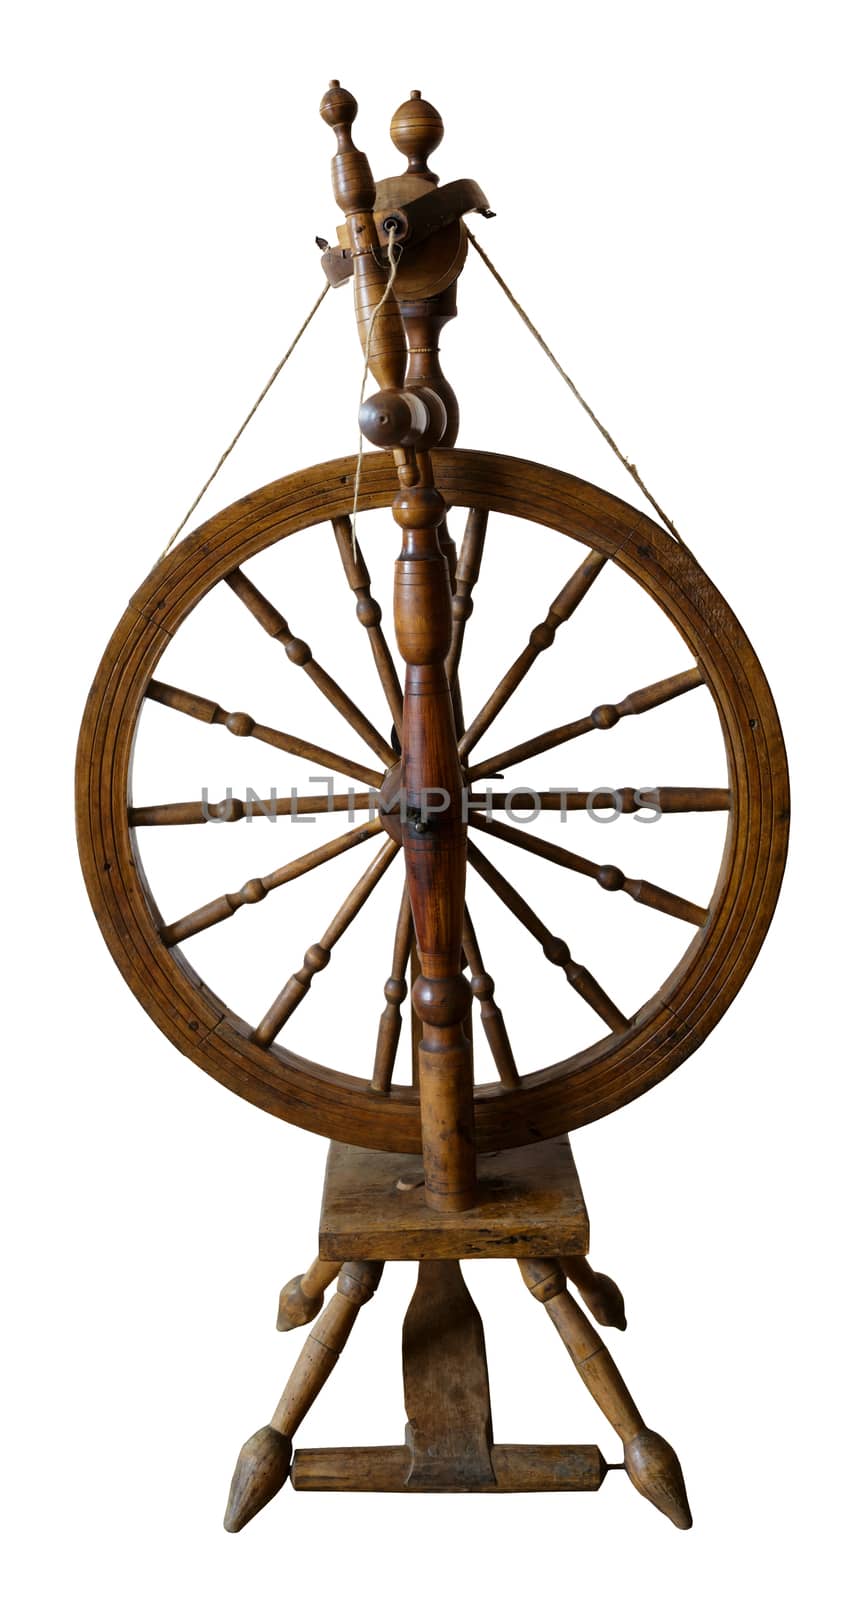 Old spinning wheel against white background